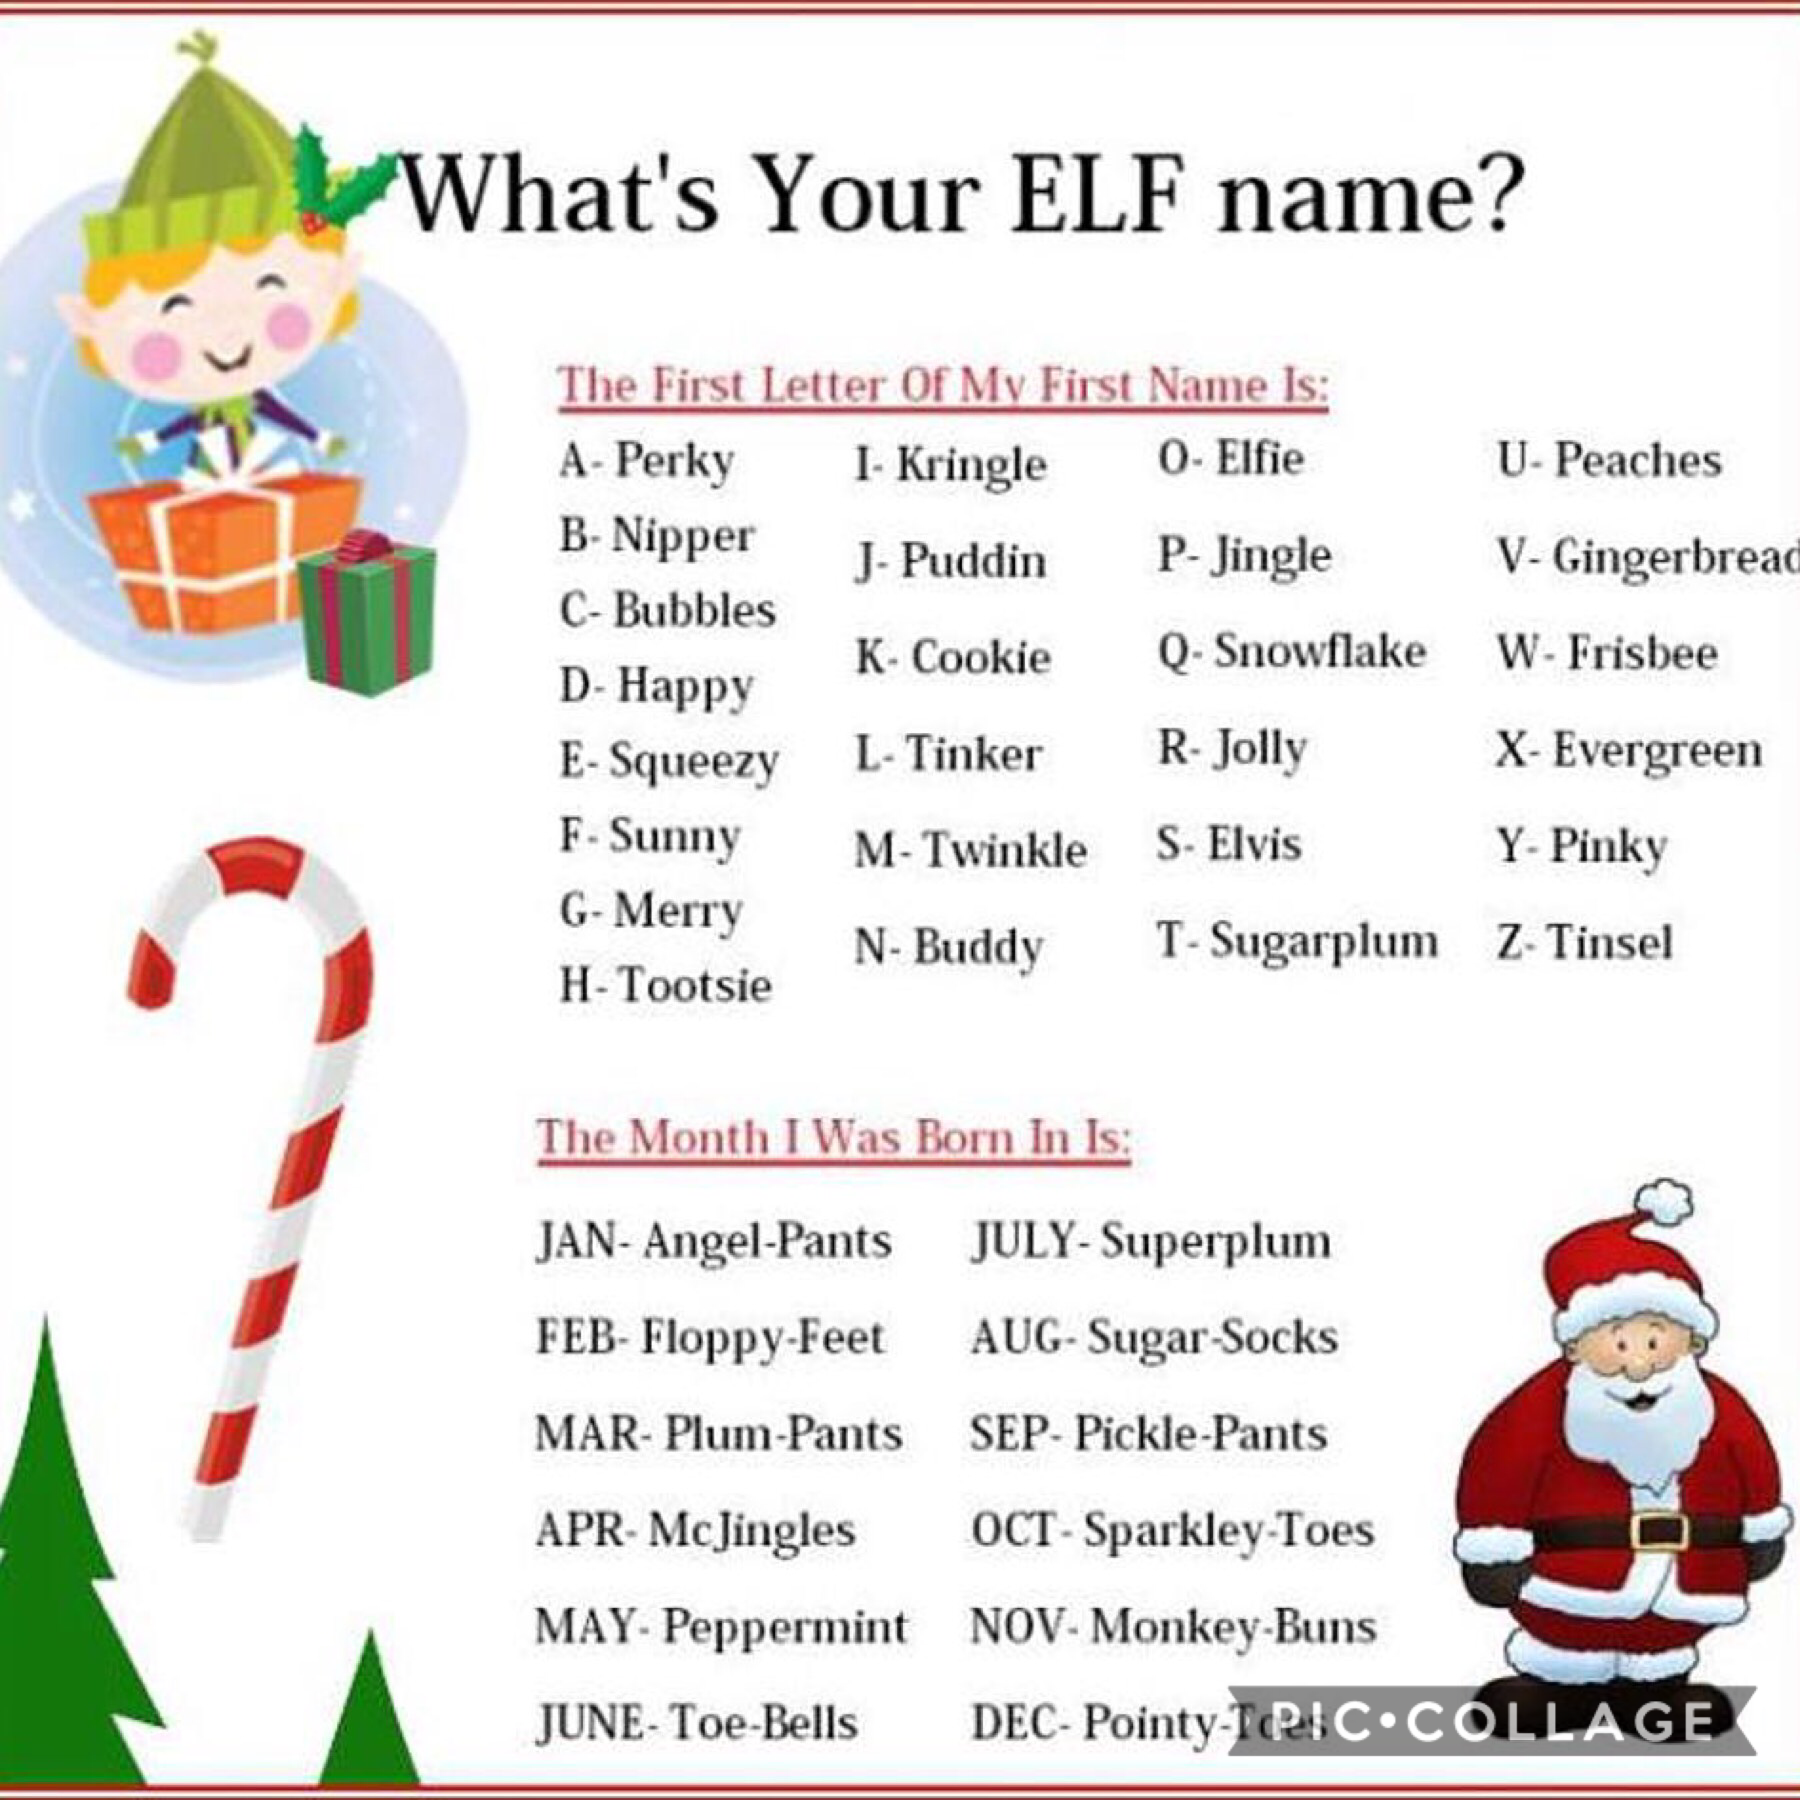 Tap!!
Merry Christmas!
If you don't want to do the first letter of your name then you can just pick one.